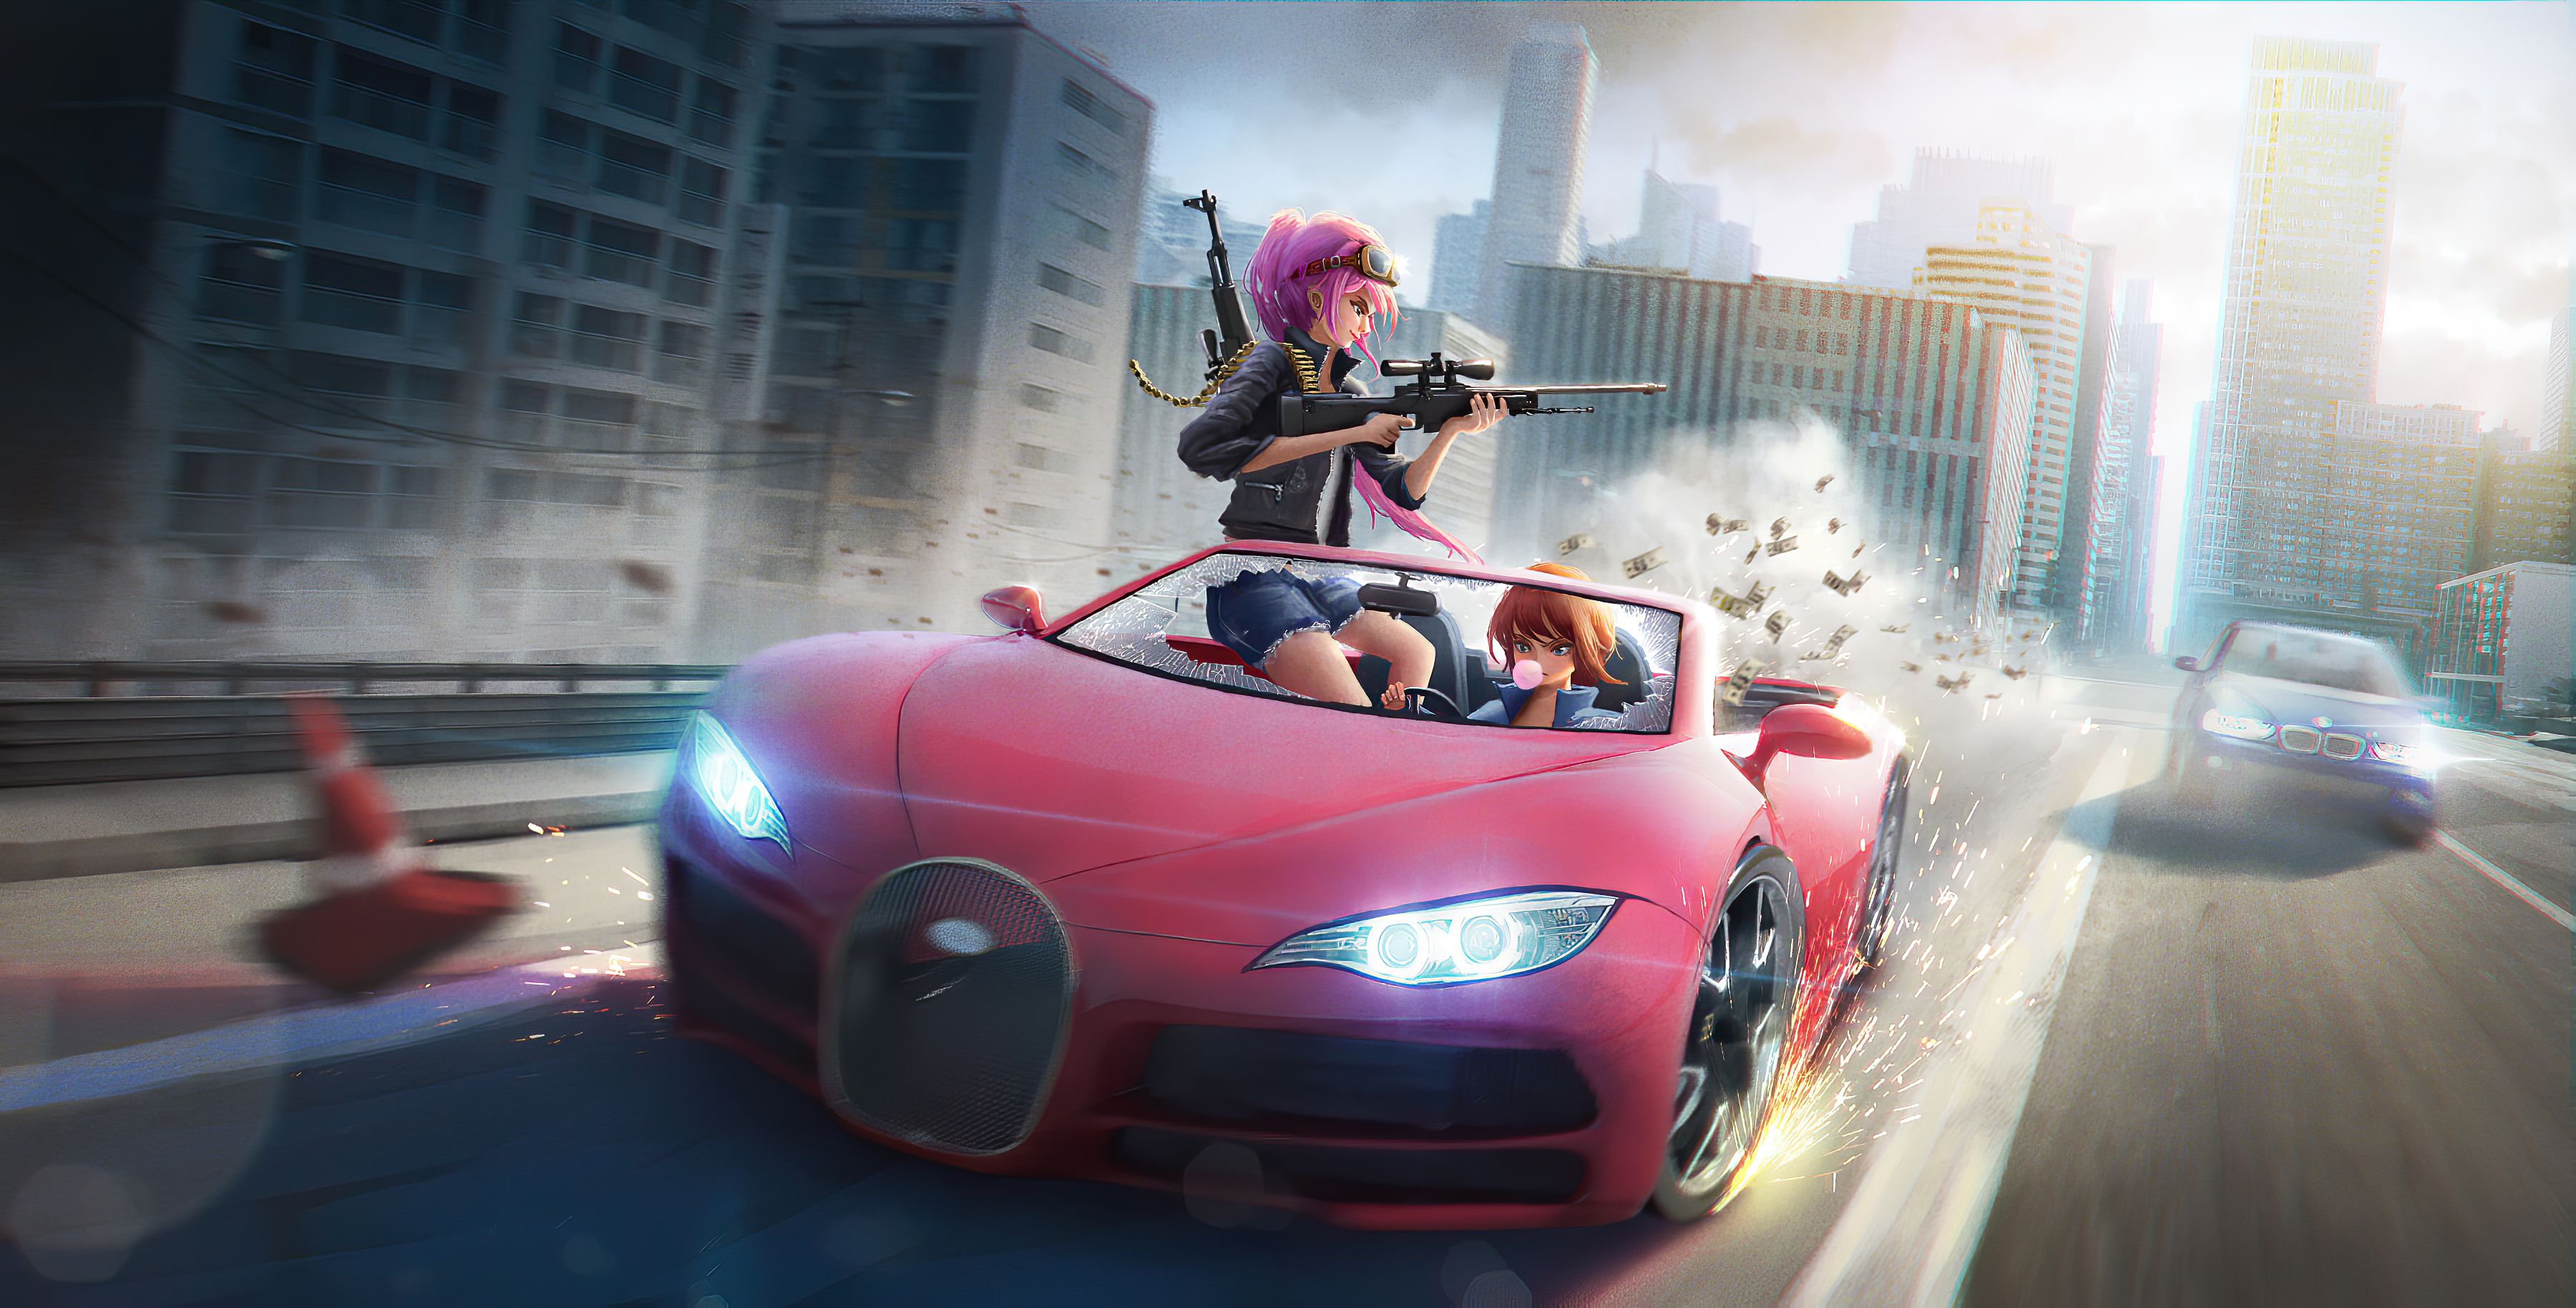 Download High Speed Adventure with Anime Car | Wallpapers.com